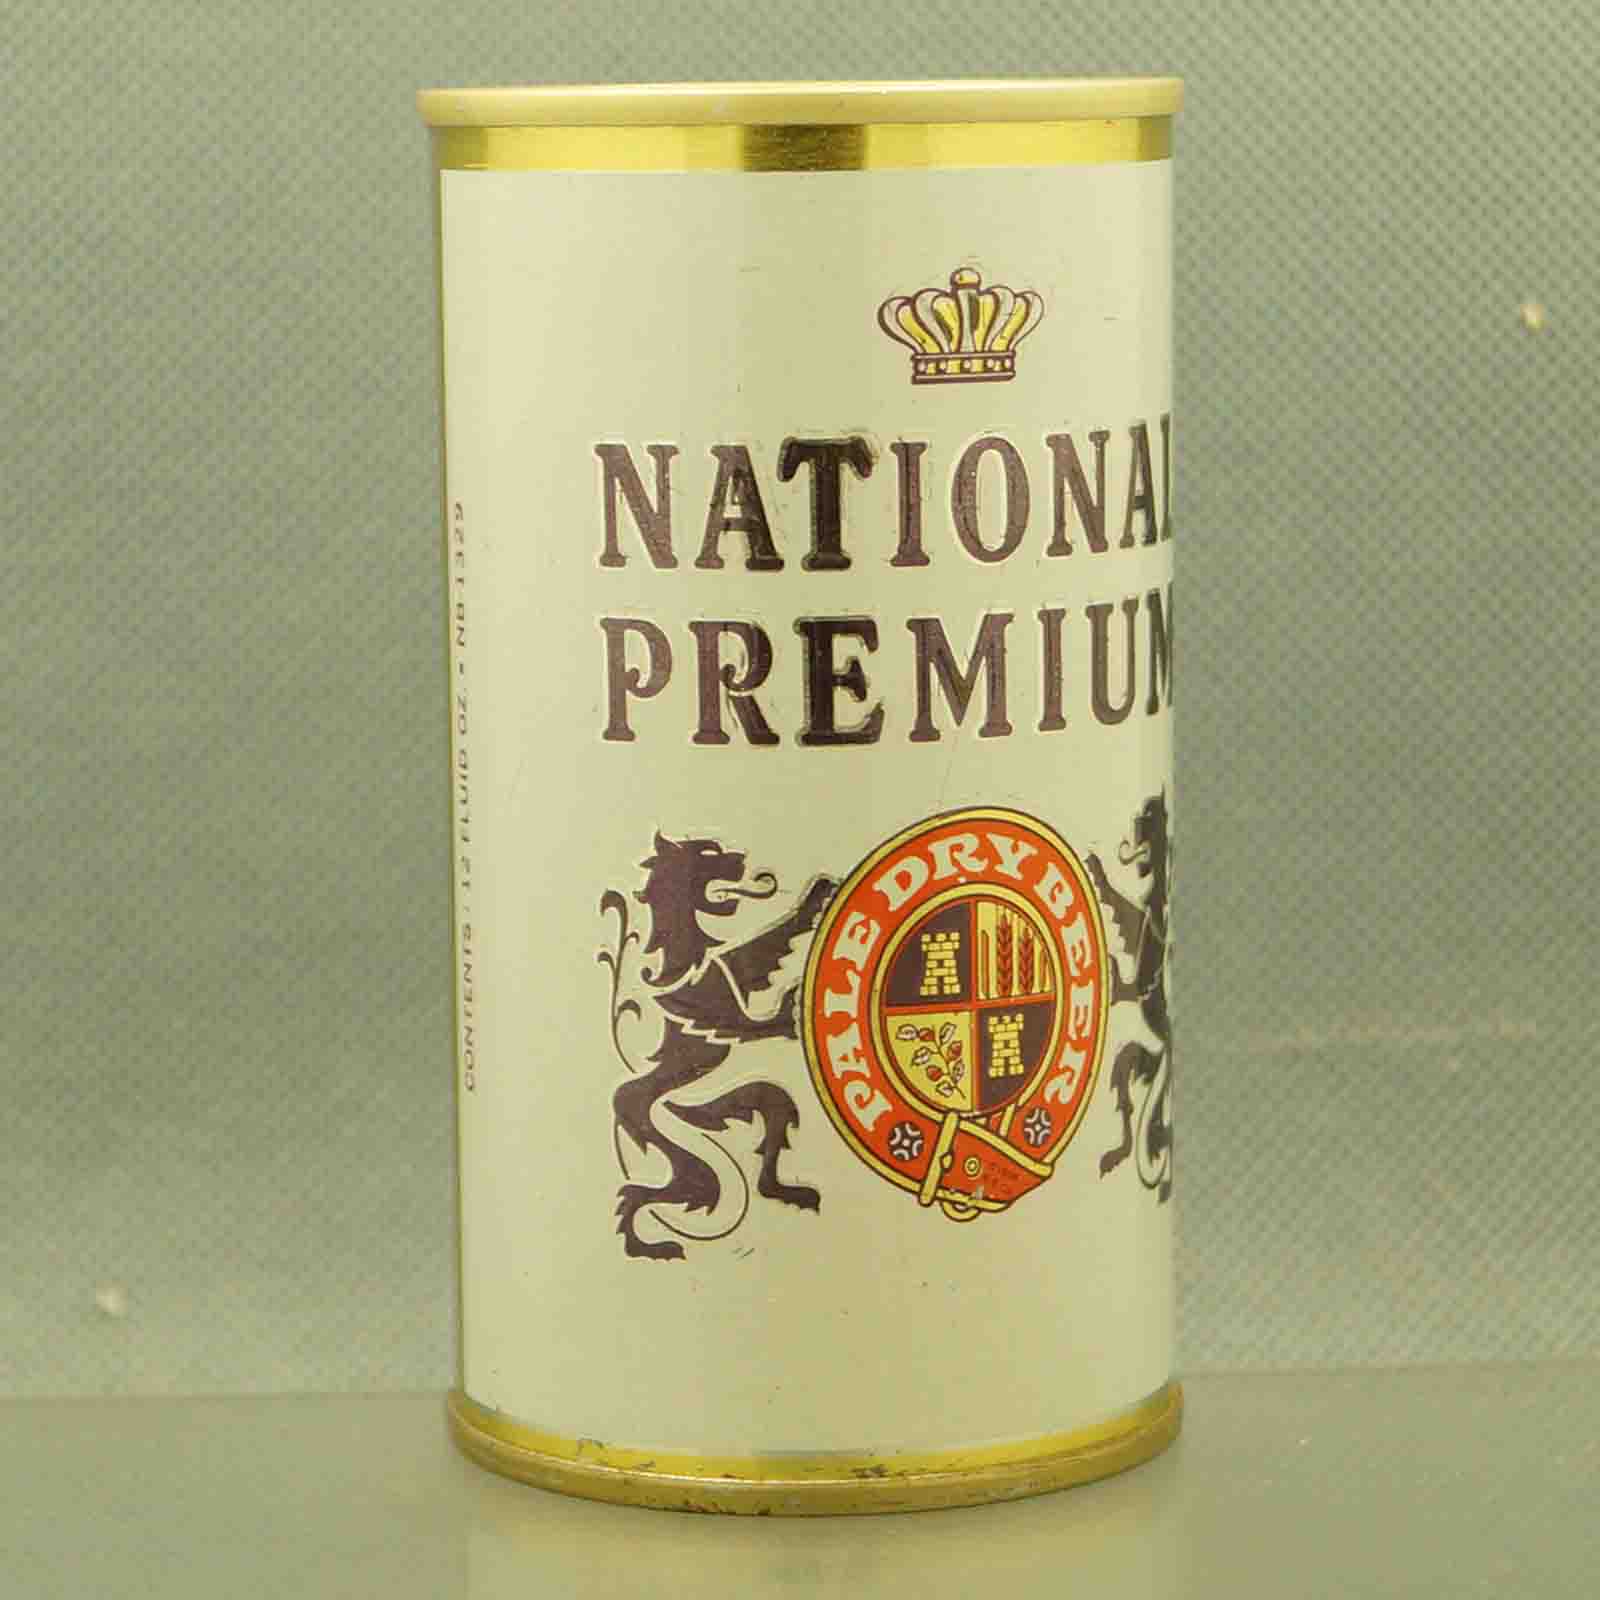 national premium 97-23 pull tab beer can 4